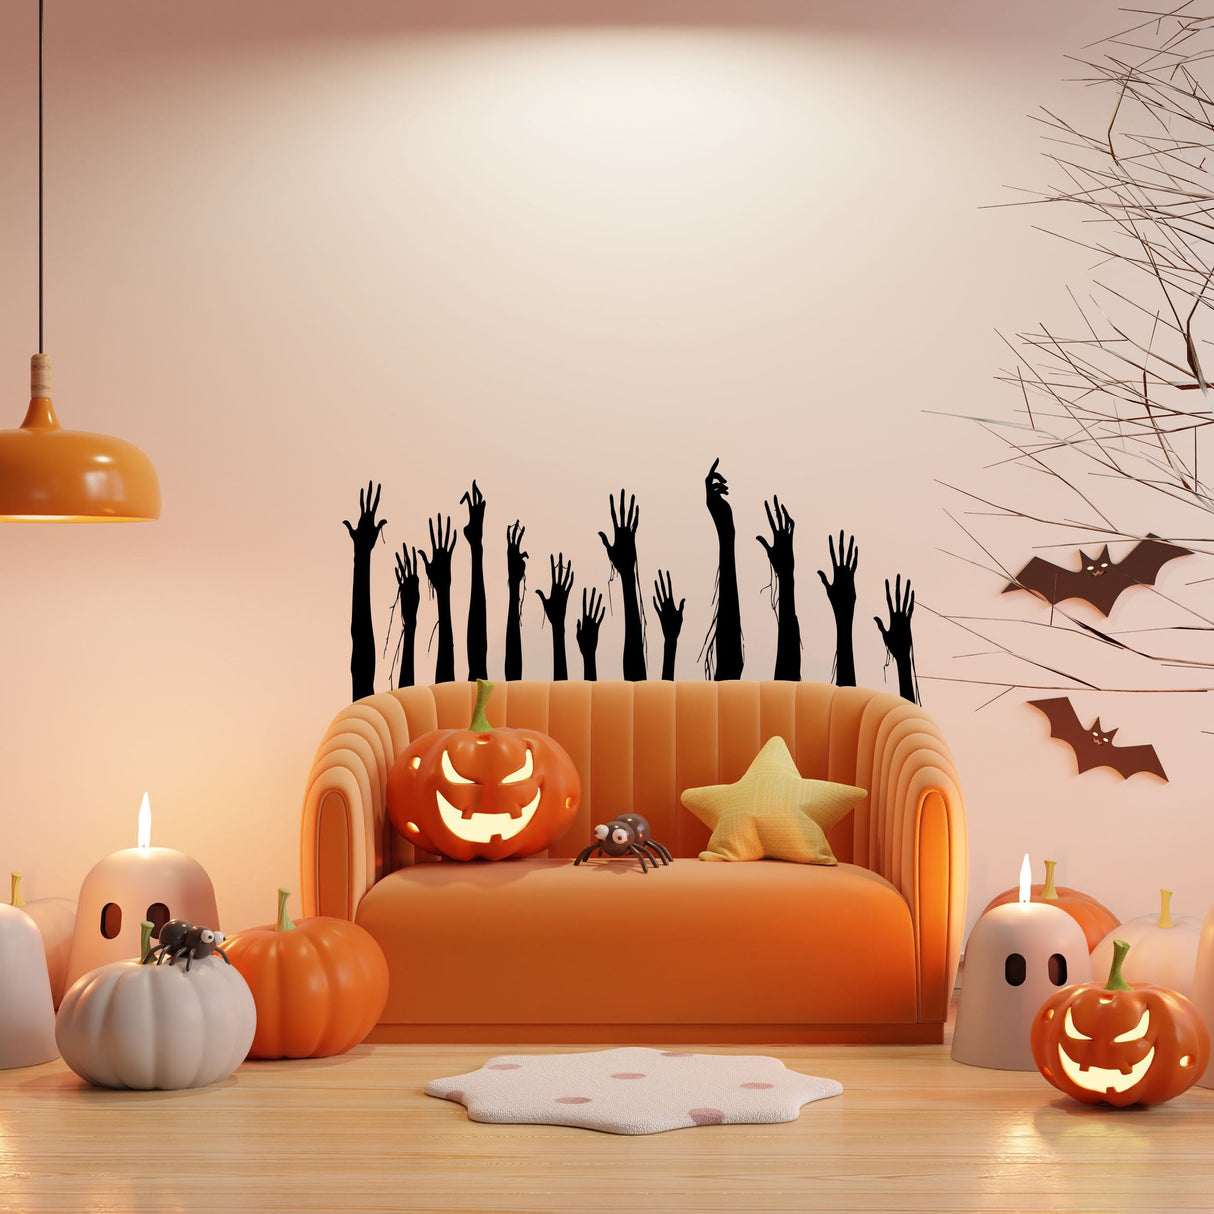 Zombie Hands Collection: Spooky Ghoul Window Decals & Creepy Hand Decorations